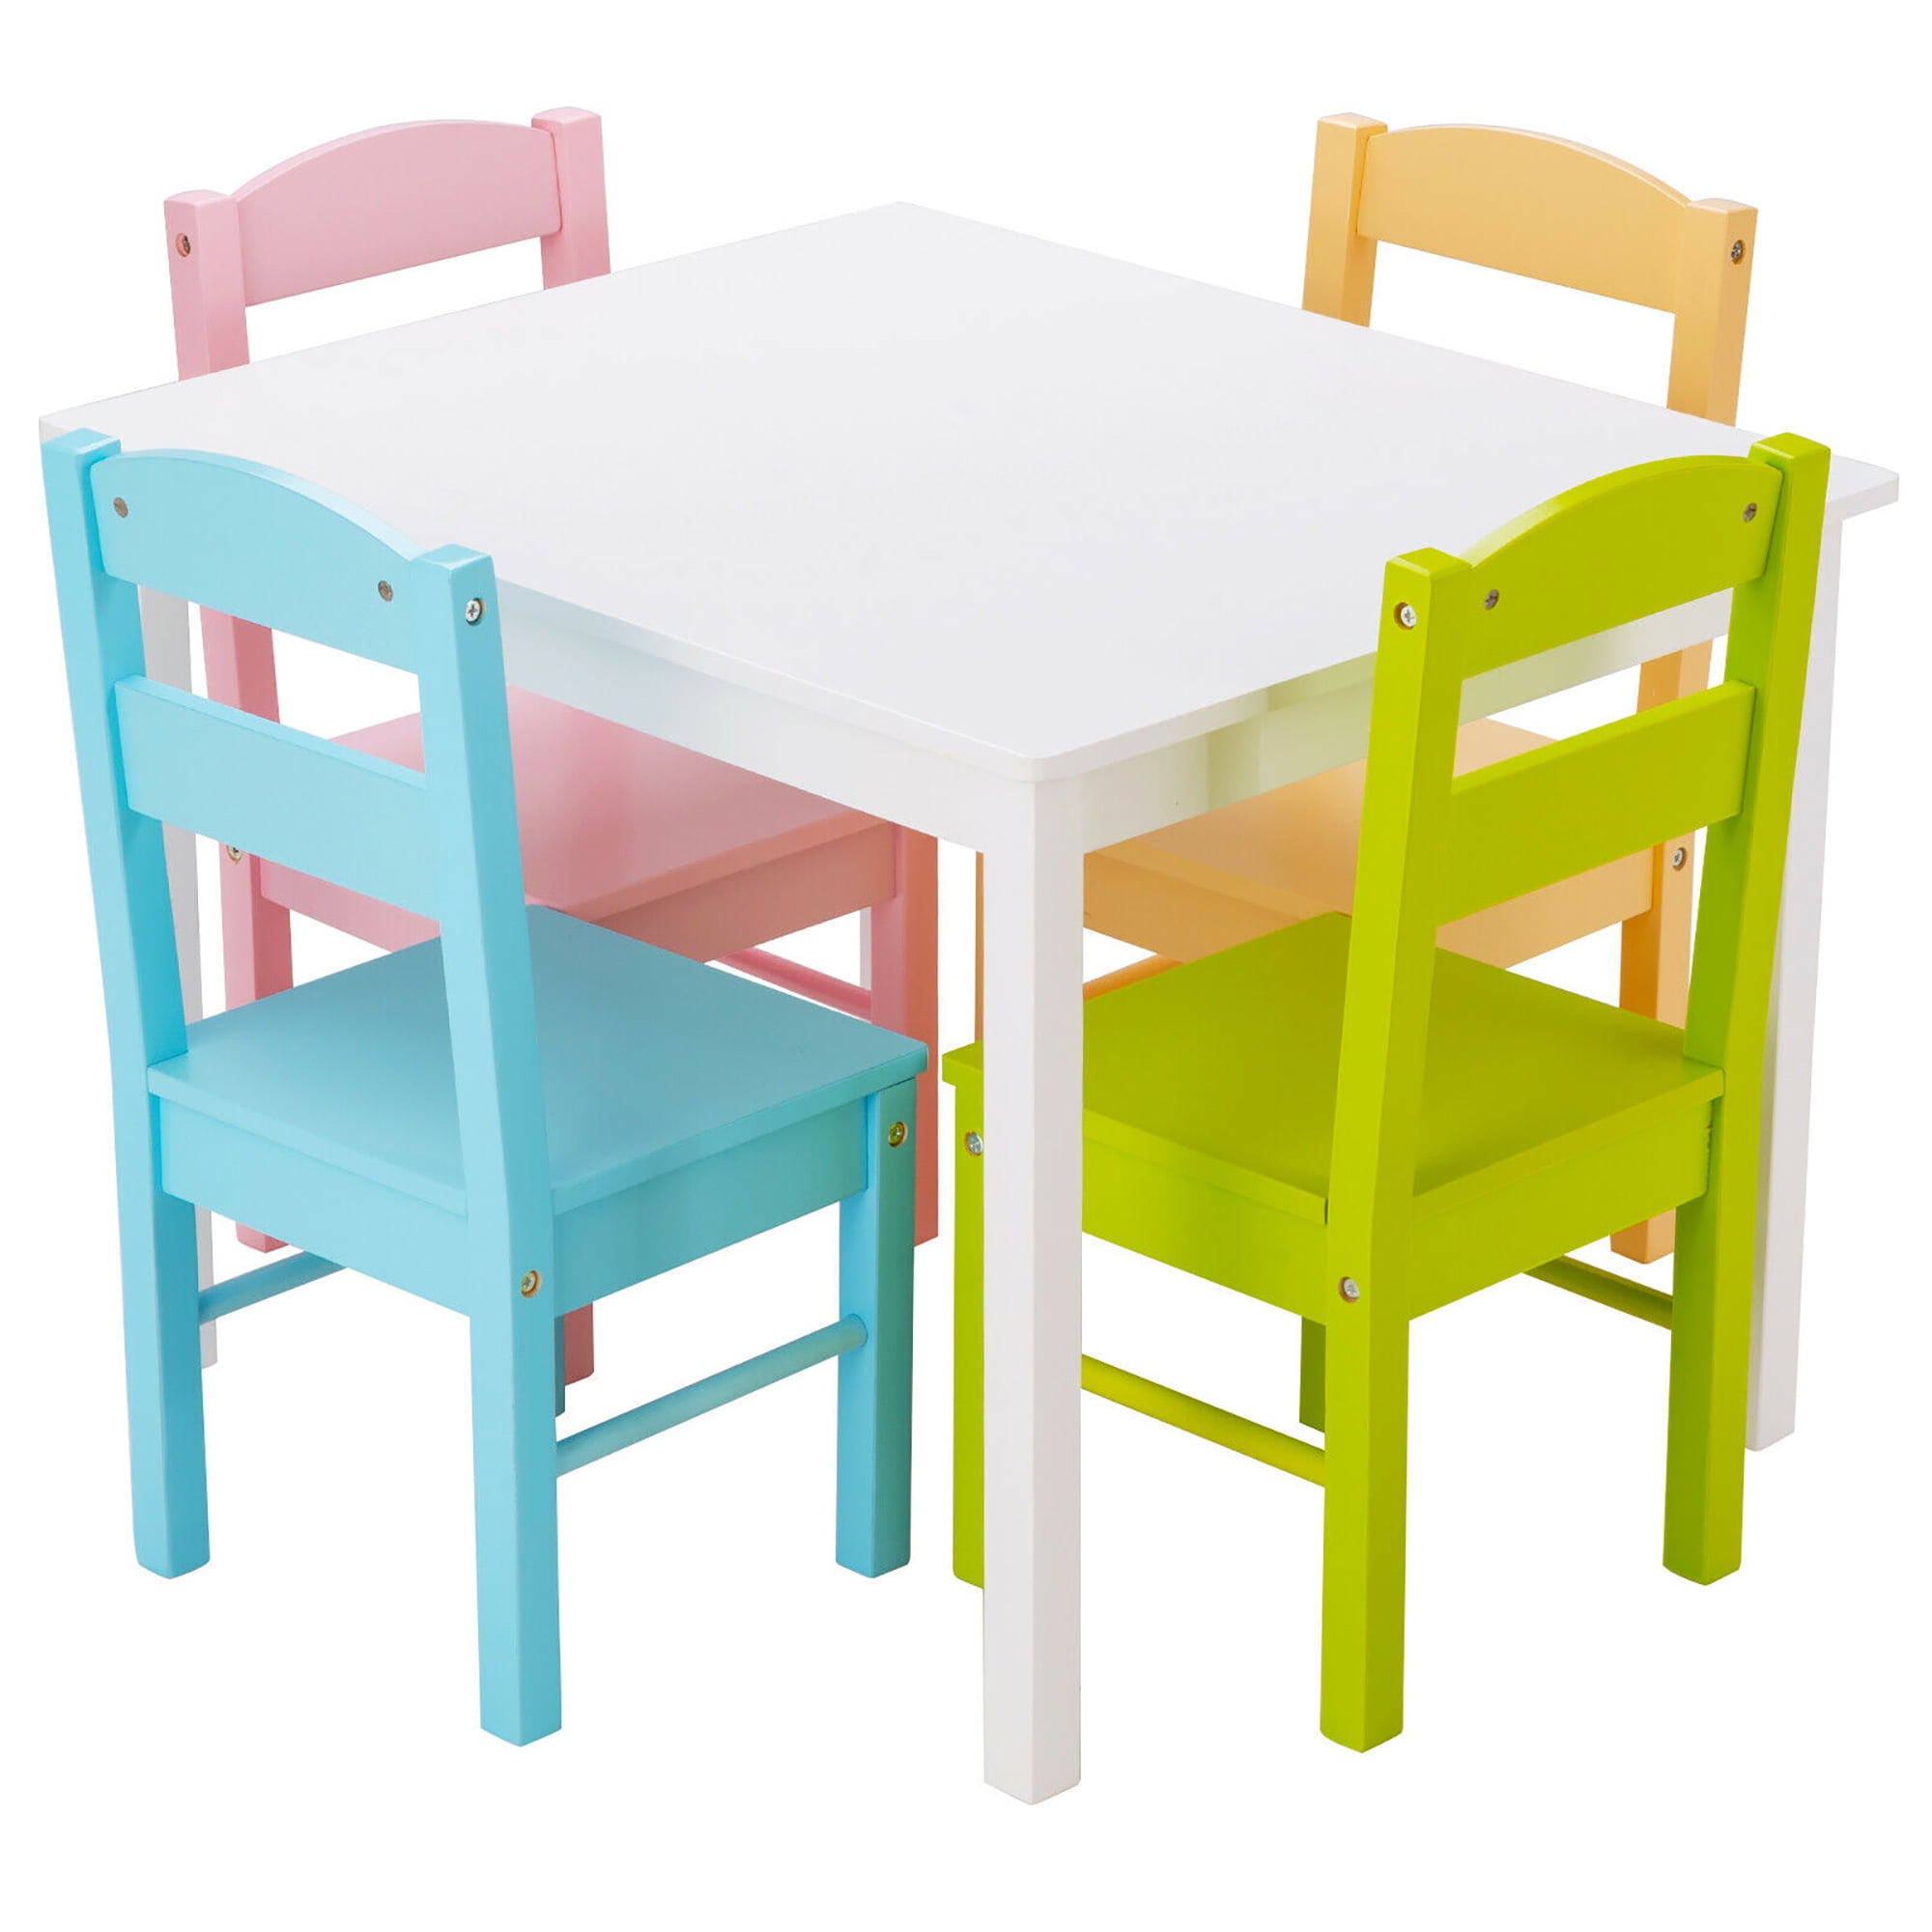 Misfortune orchestra champion Costway 5 Piece Kids Wood Table Chair Set Activity Toddler Playroom  Furniture Colorful - Walmart.com